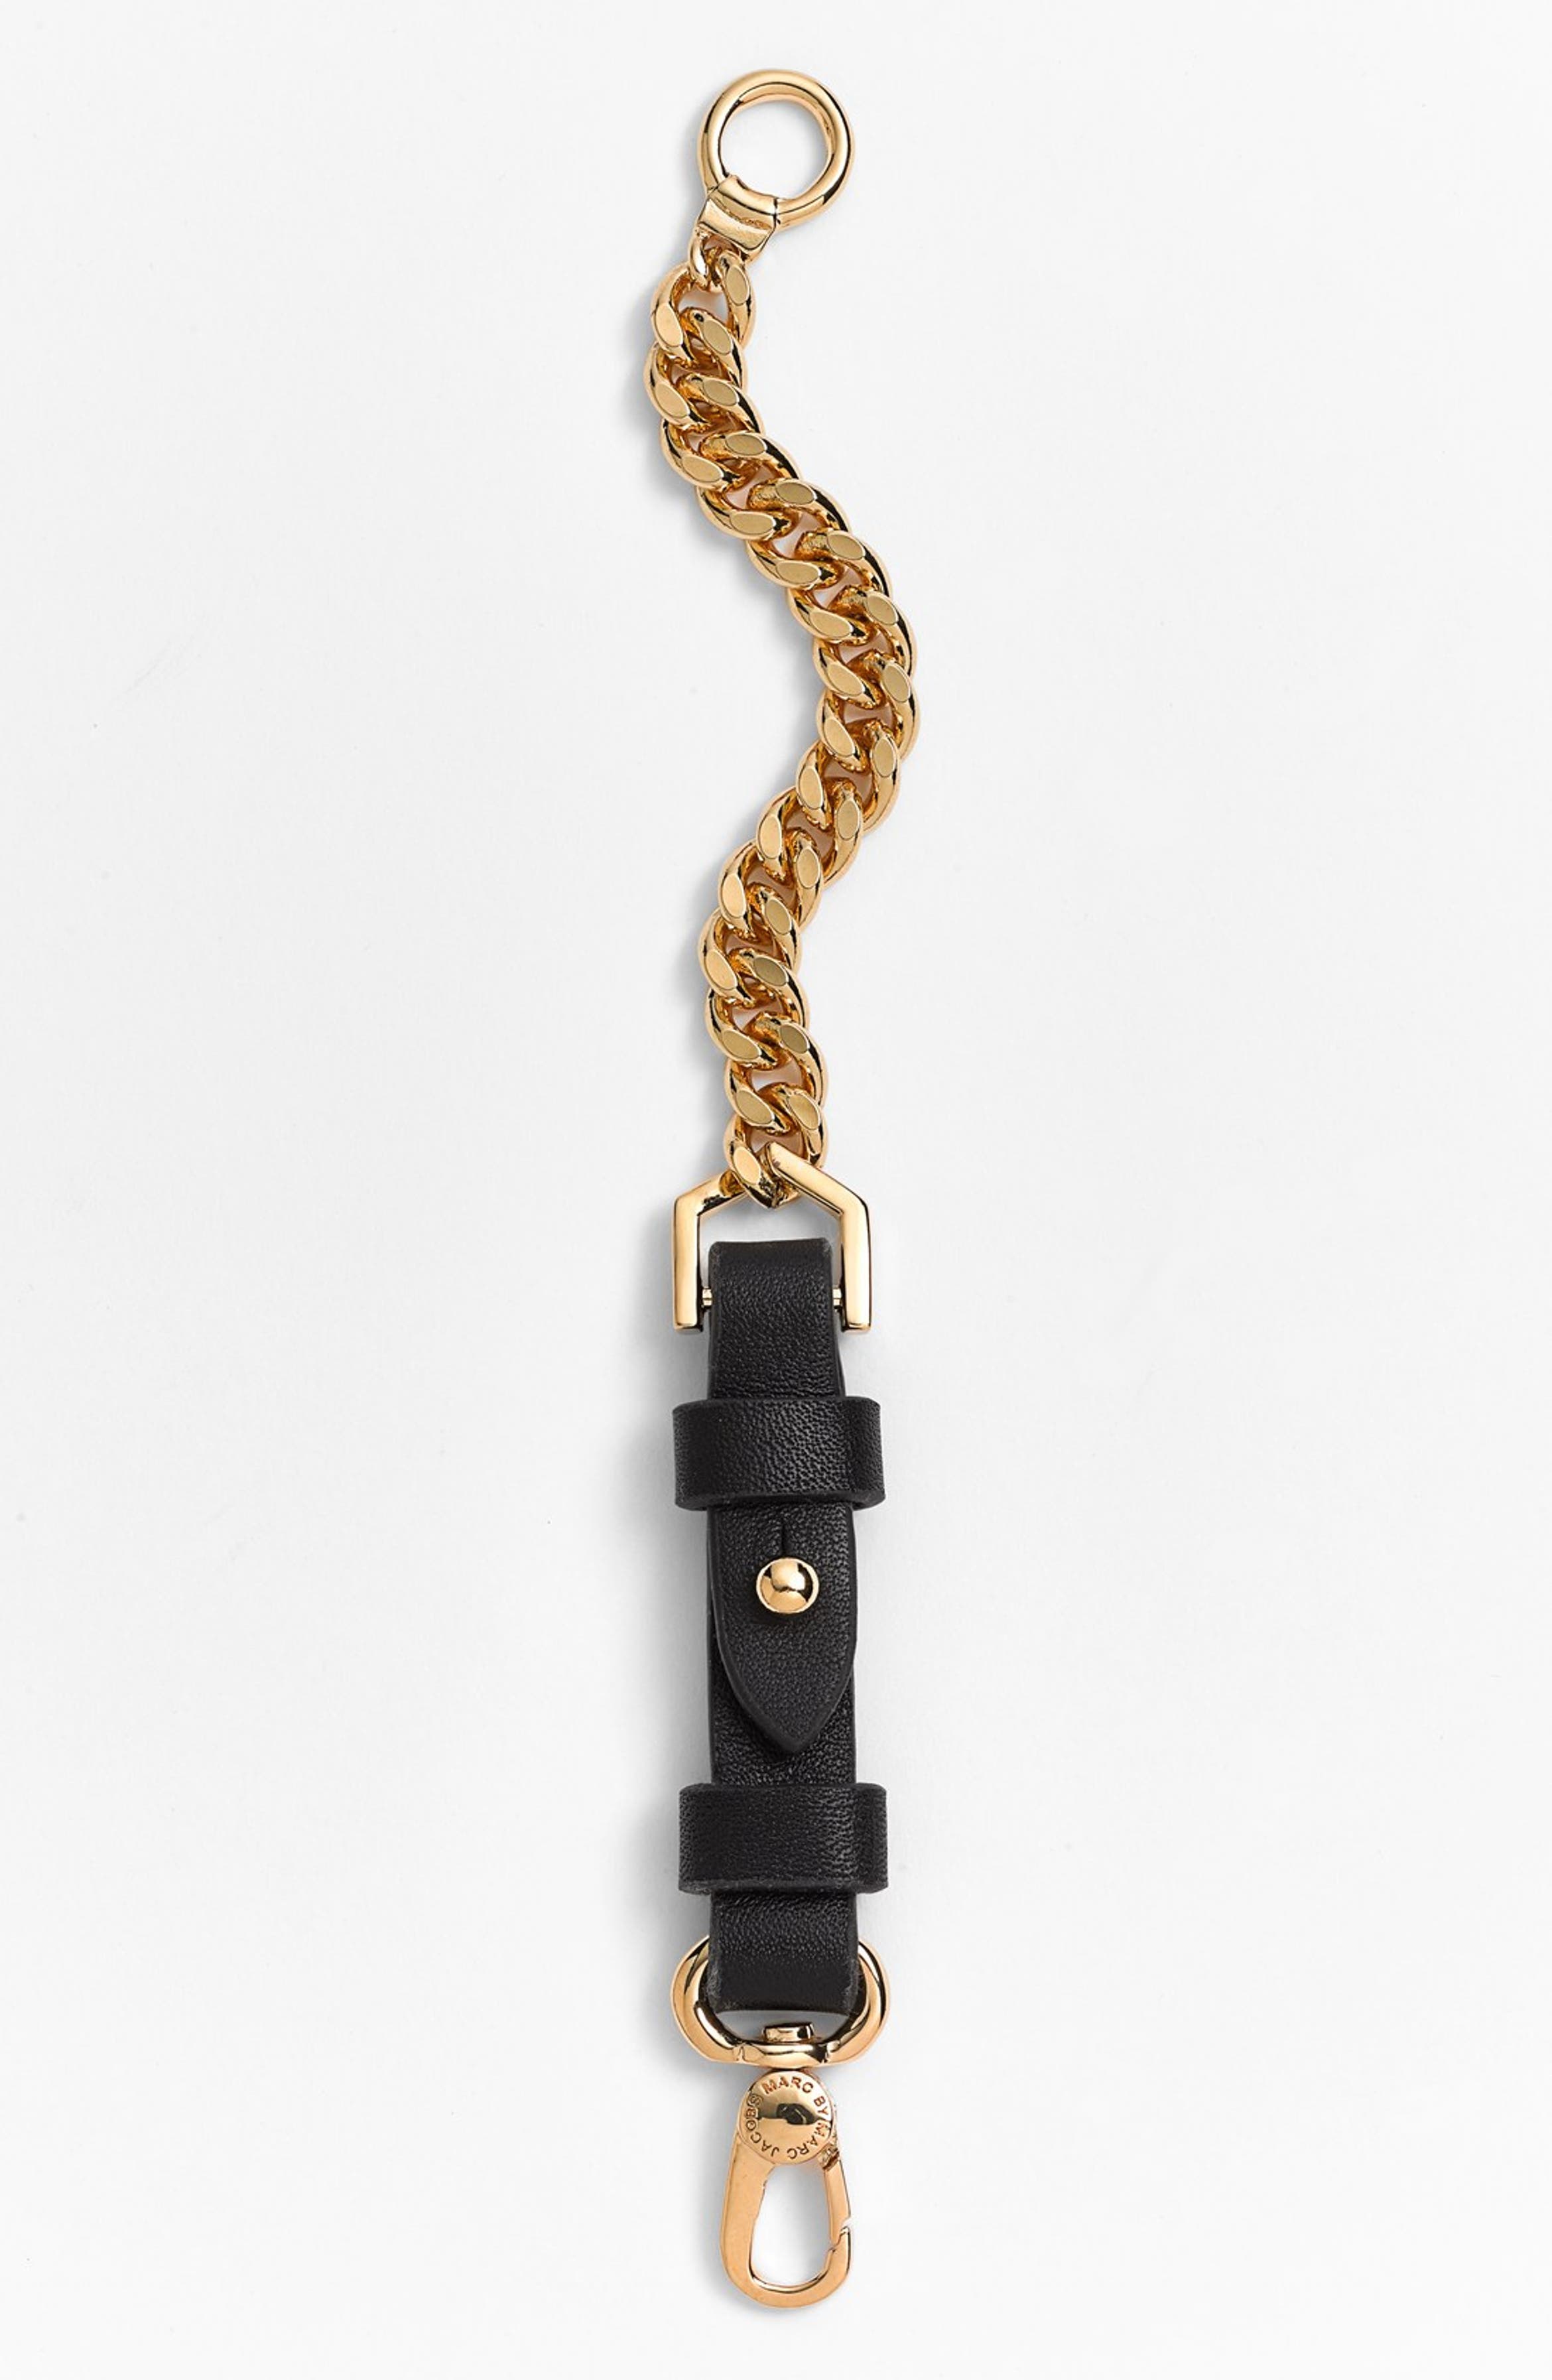 MARC BY MARC JACOBS 'Key Items' Leather & Chain Bracelet | Nordstrom